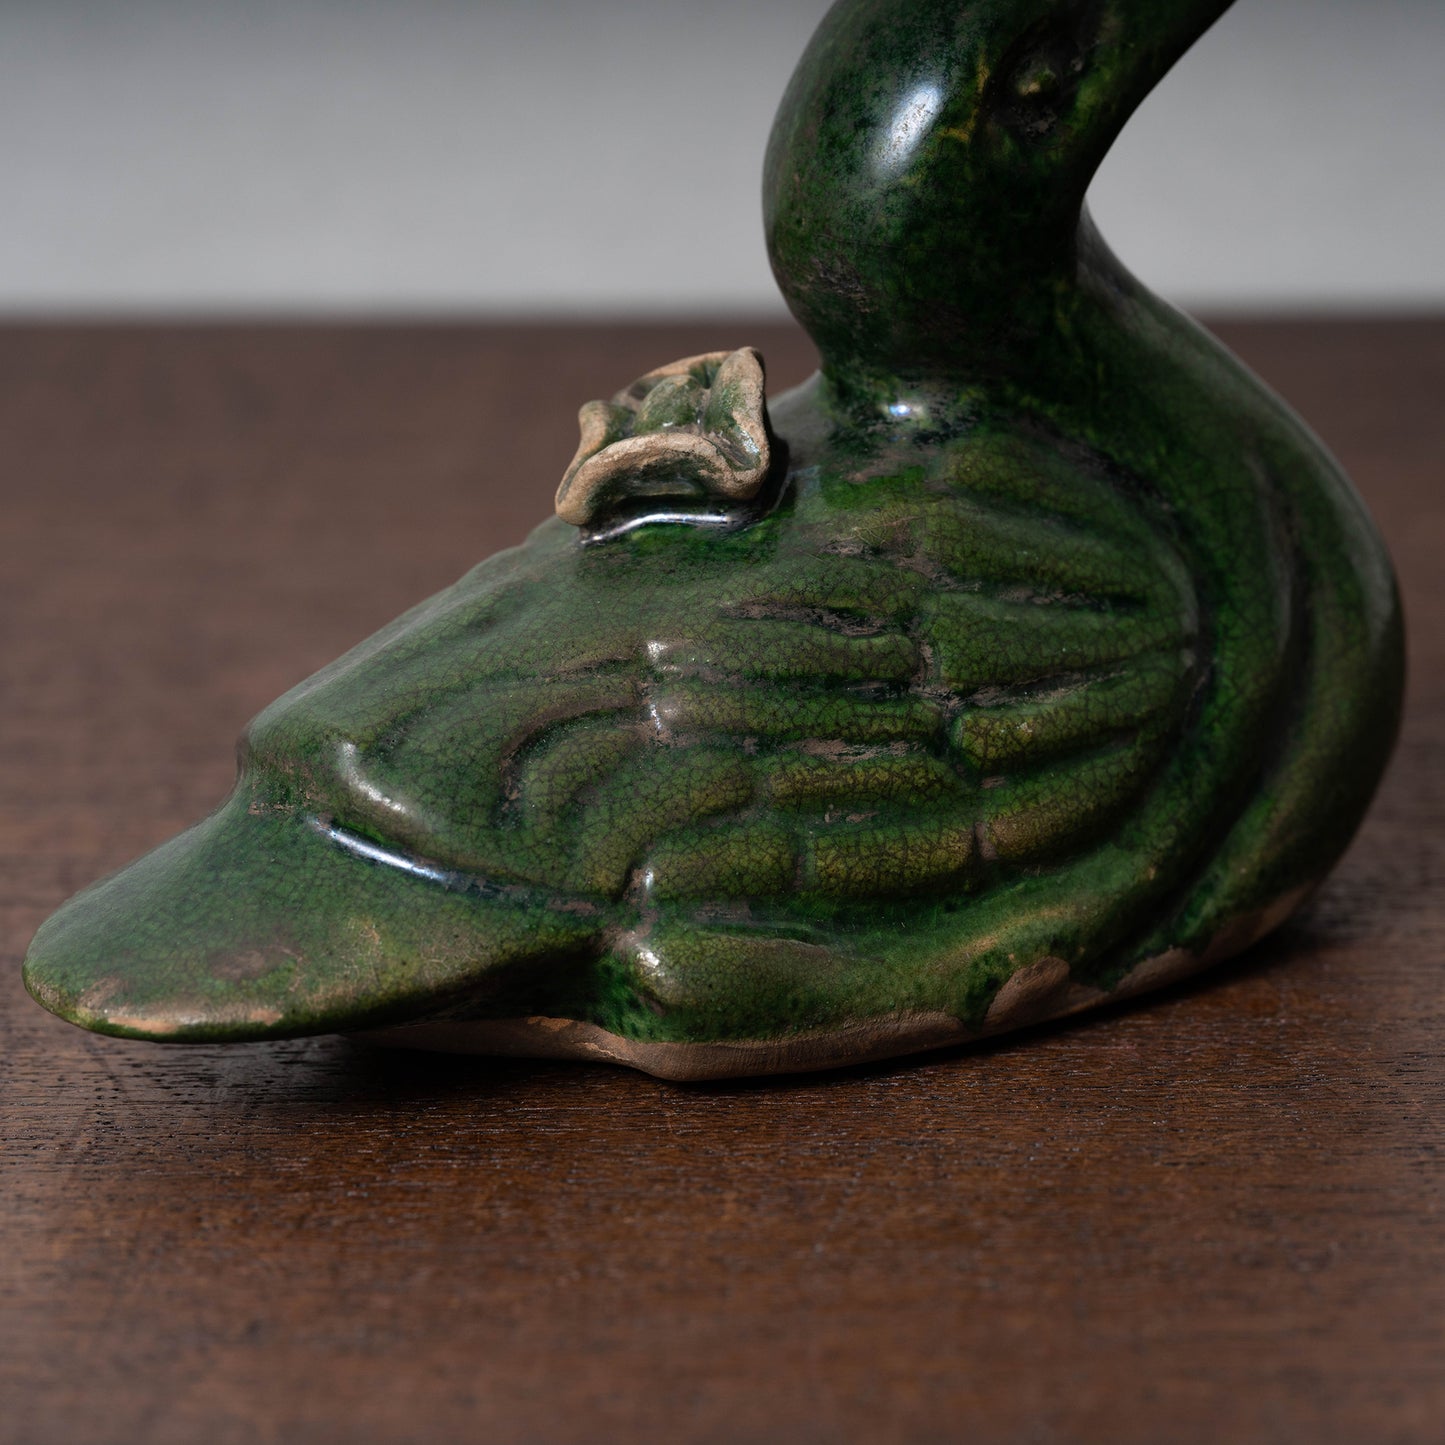 Northern Song Dynasty Cizhou Ware Green-glaze figurines with Bird Shaped